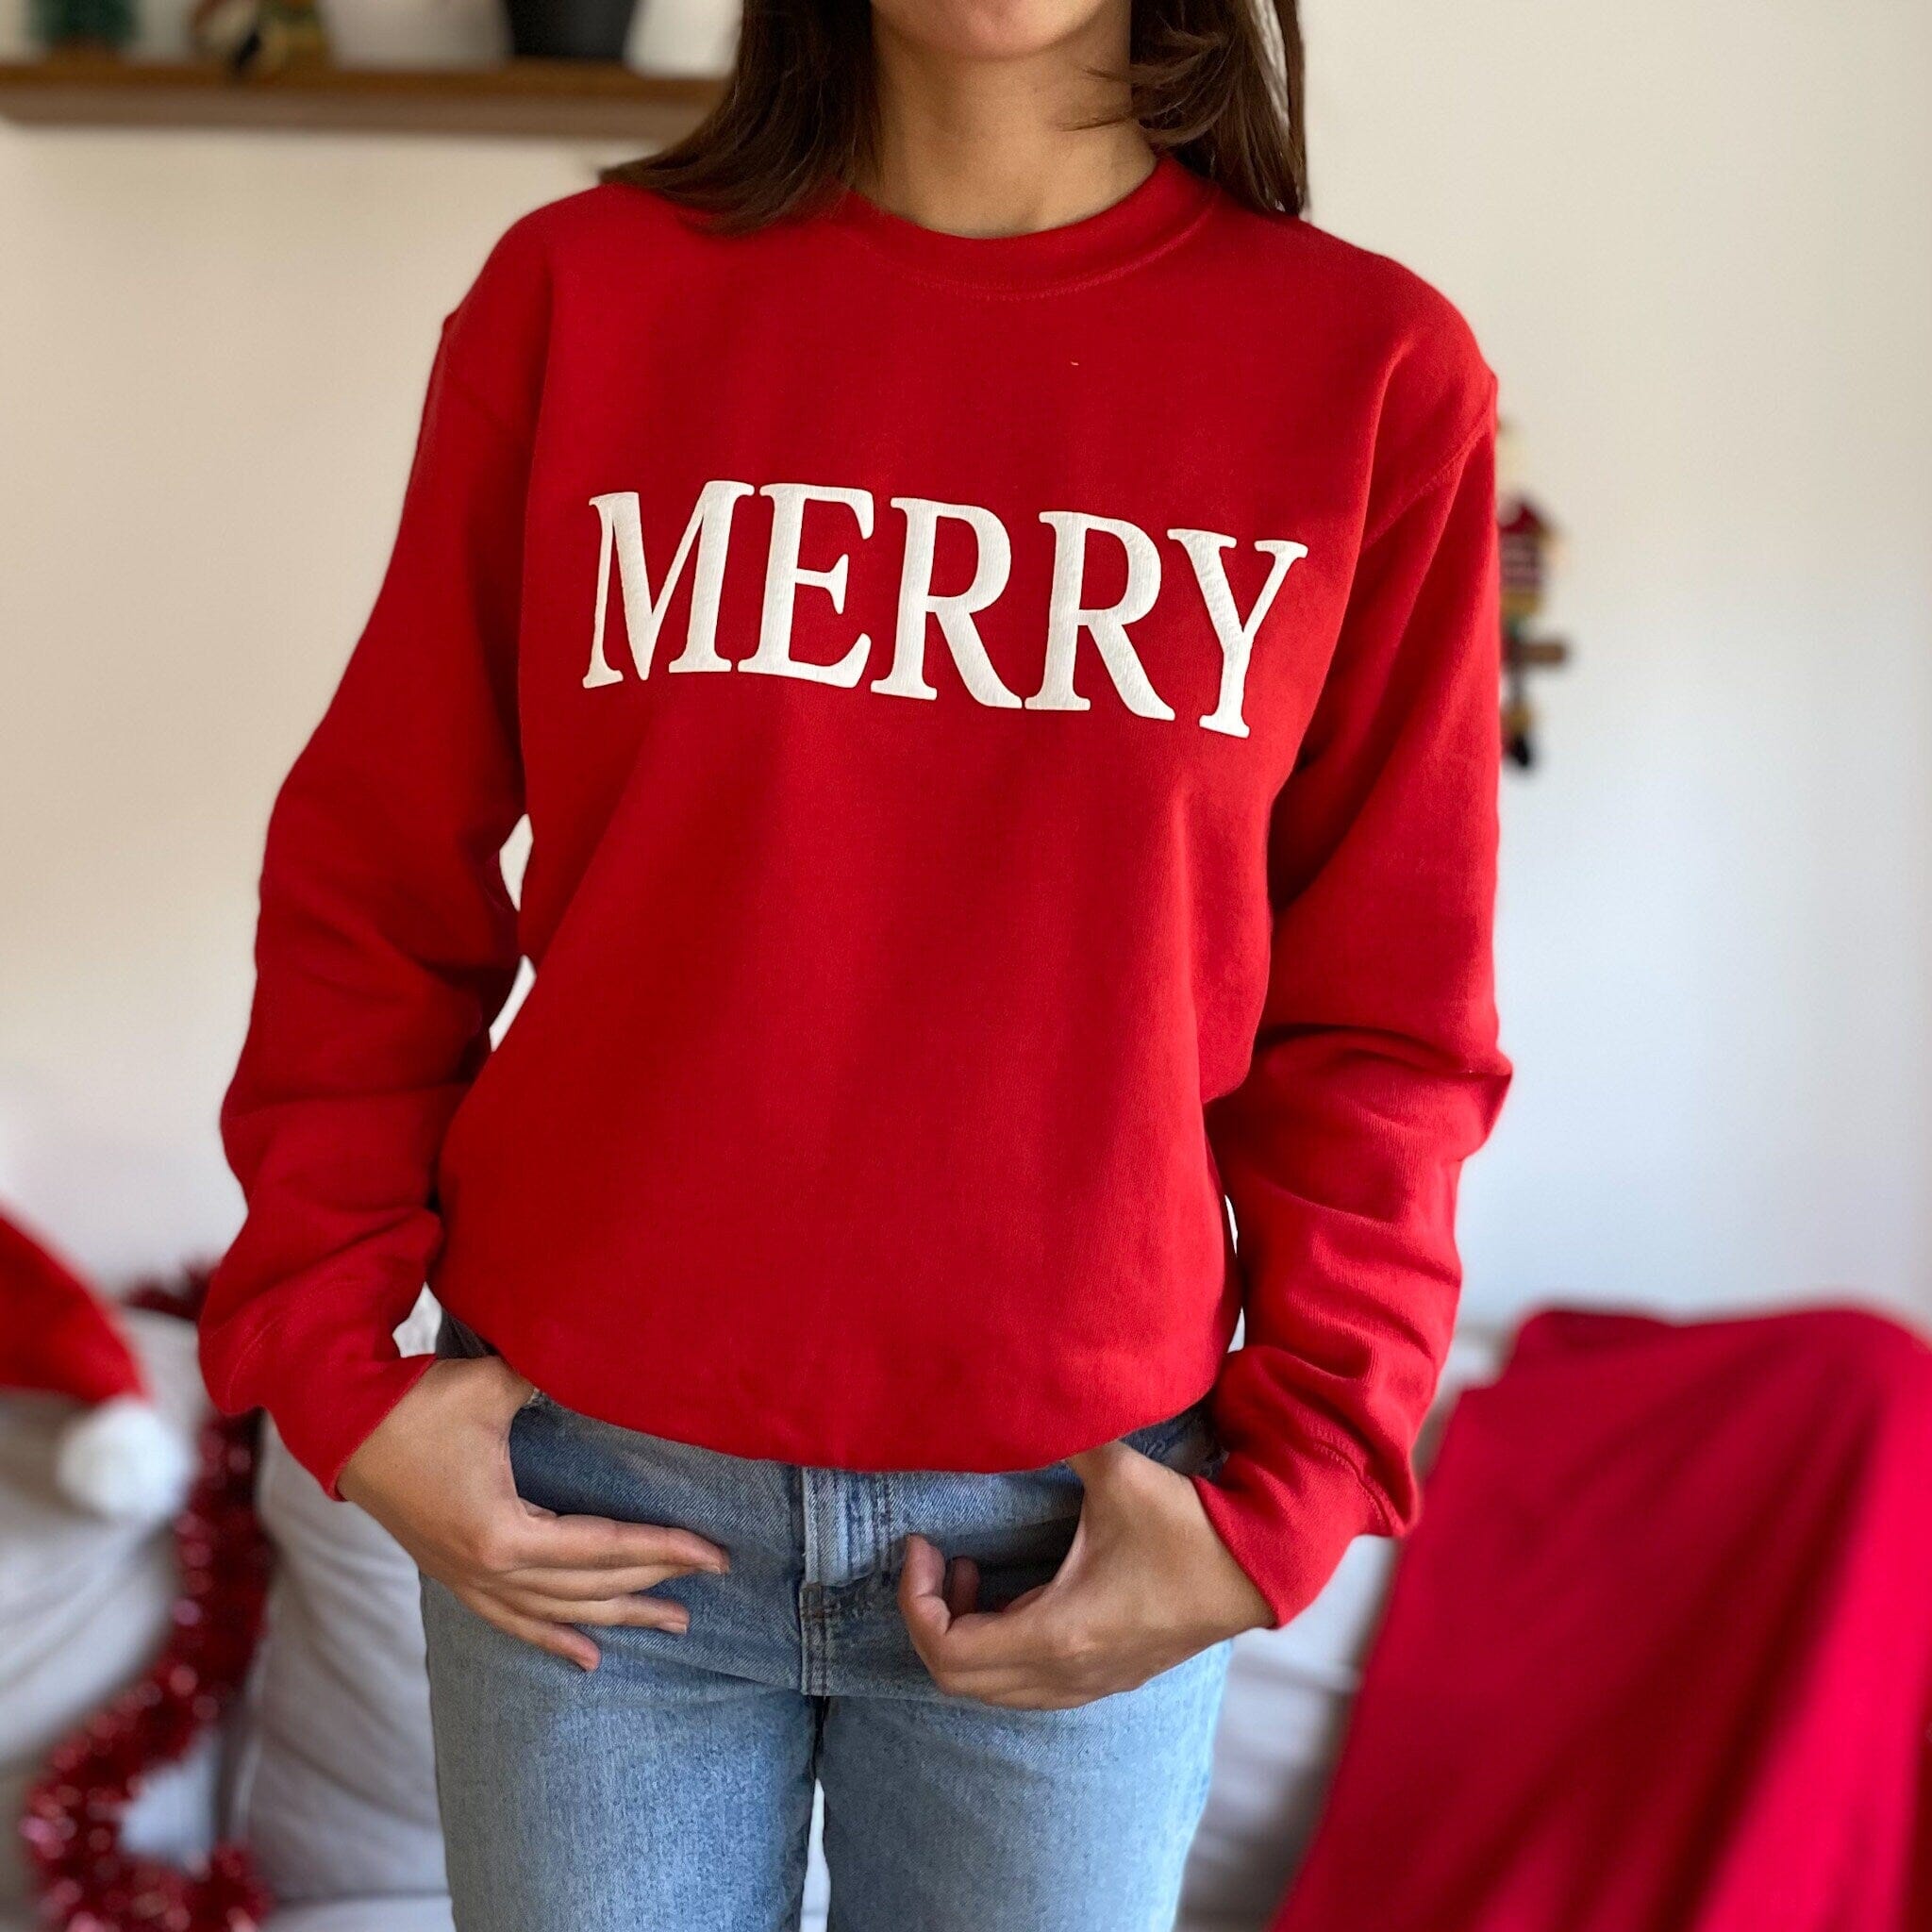 Merry Christmas Puff Print Jumper 3D Letters Unisex Adult & Kids Sizes Jumpers Xmas For Women Girl Sweatshirt